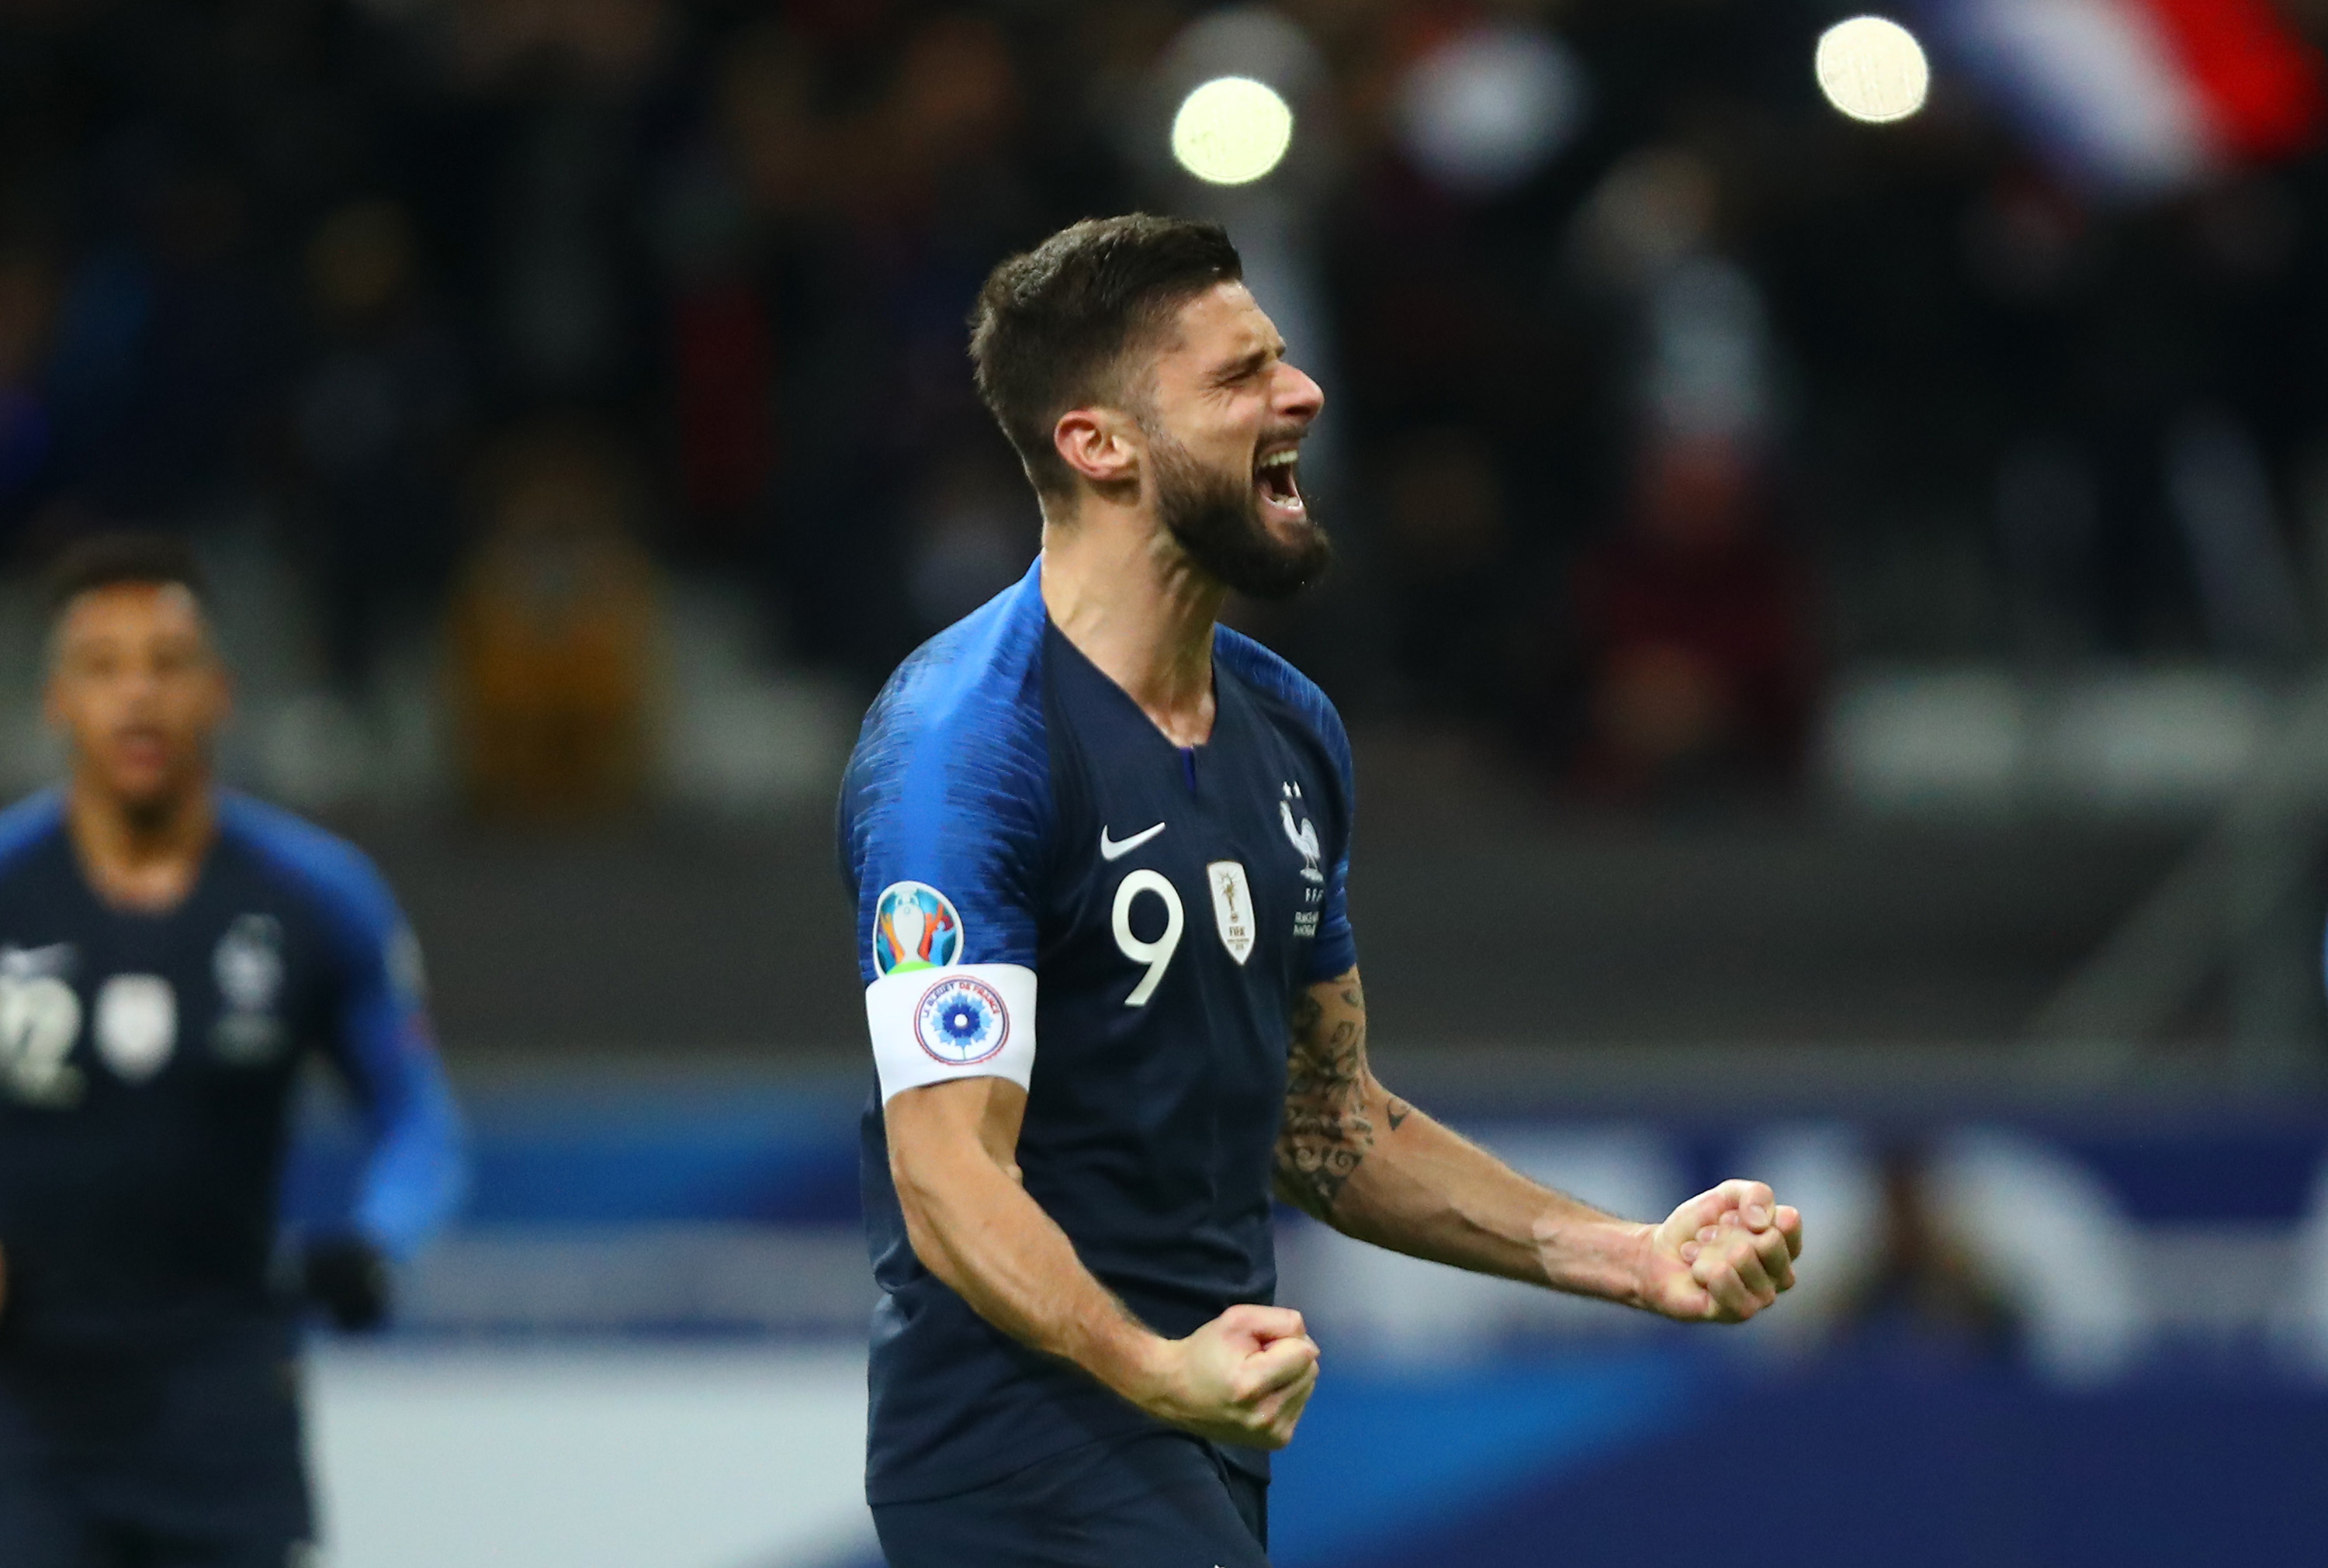 PARIS, FRANCE - NOVEMBER 14: Olivier Giroud of France celebrates after scoring his team's second goal during the UEFA Euro 2020 Qualifier between France and Moldova on November 14, 2019 in Paris, France. (Photo by Dean Mouhtaropoulos/Getty Images)